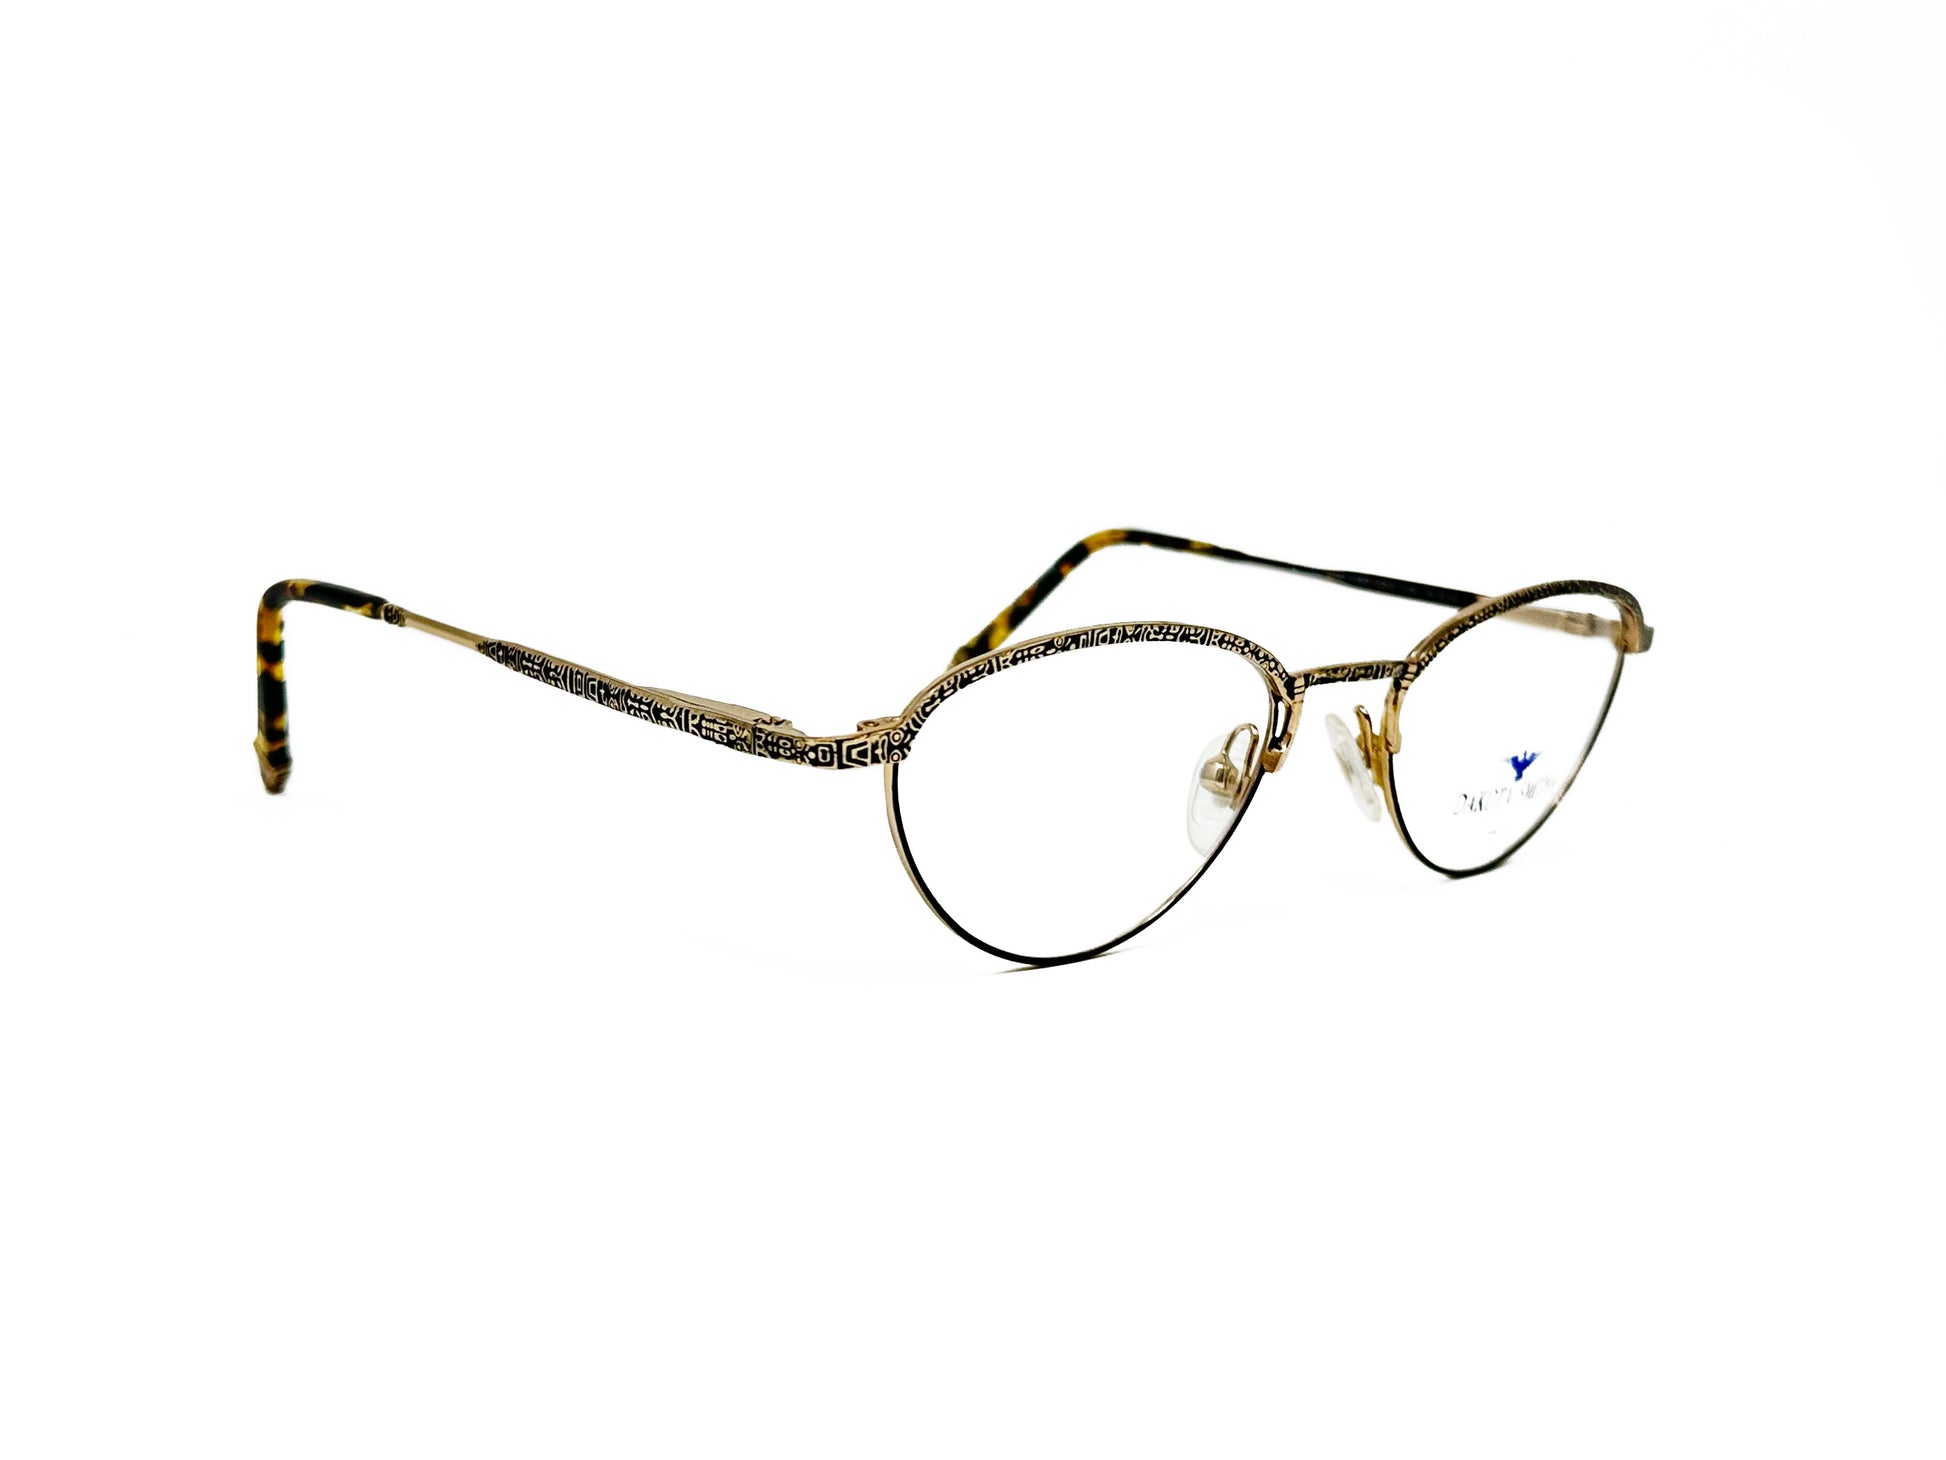 Dakota Smith rounded-triangular, metal, optical frame with etching. Model: 1228n Eskimo. Color: Aged Gold. Side view.